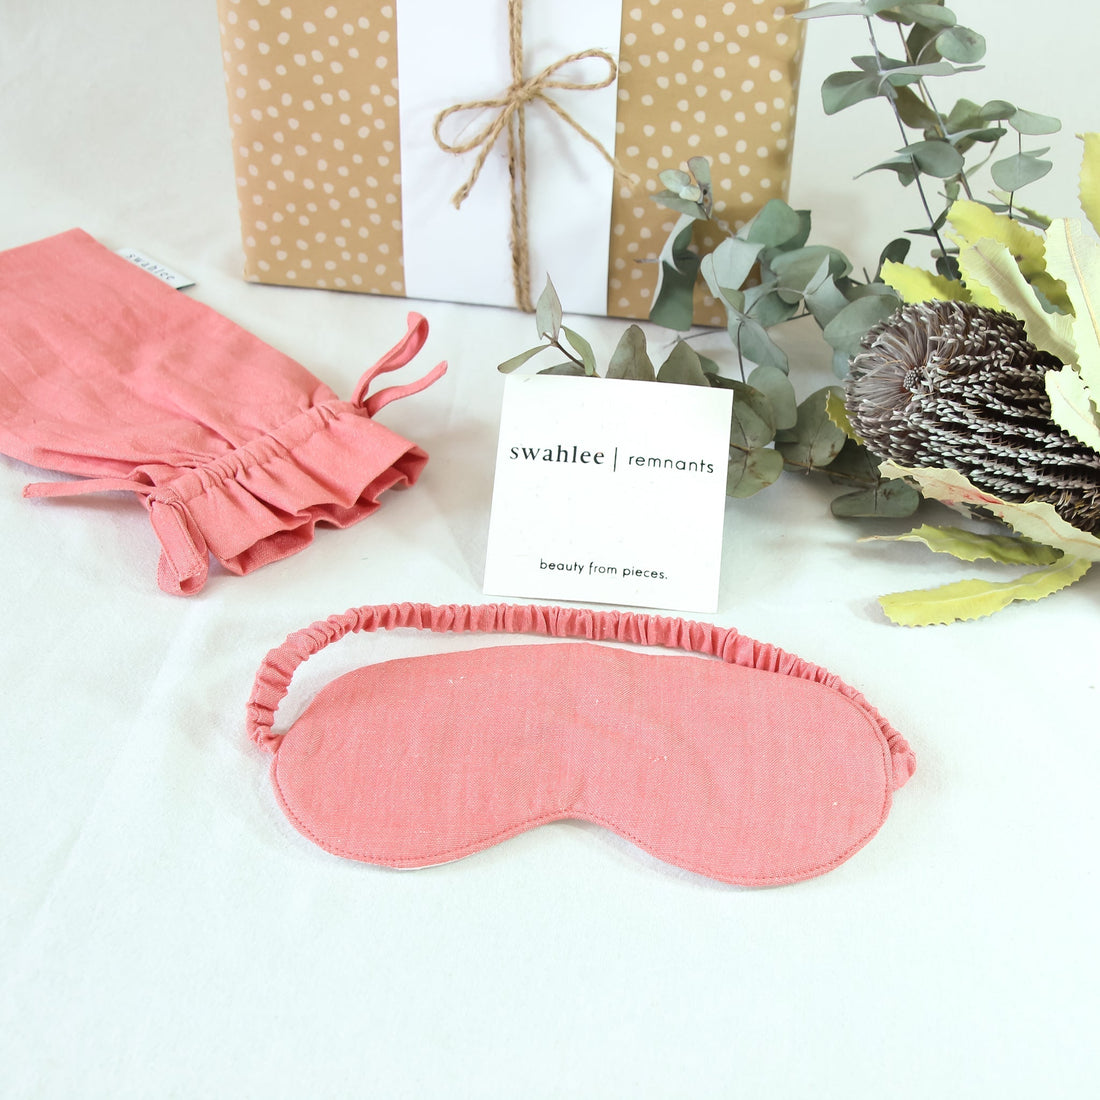 Personal Care fair trade ethical sustainable fashion Handloom Cotton Eye Masks conscious purchase Swahlee